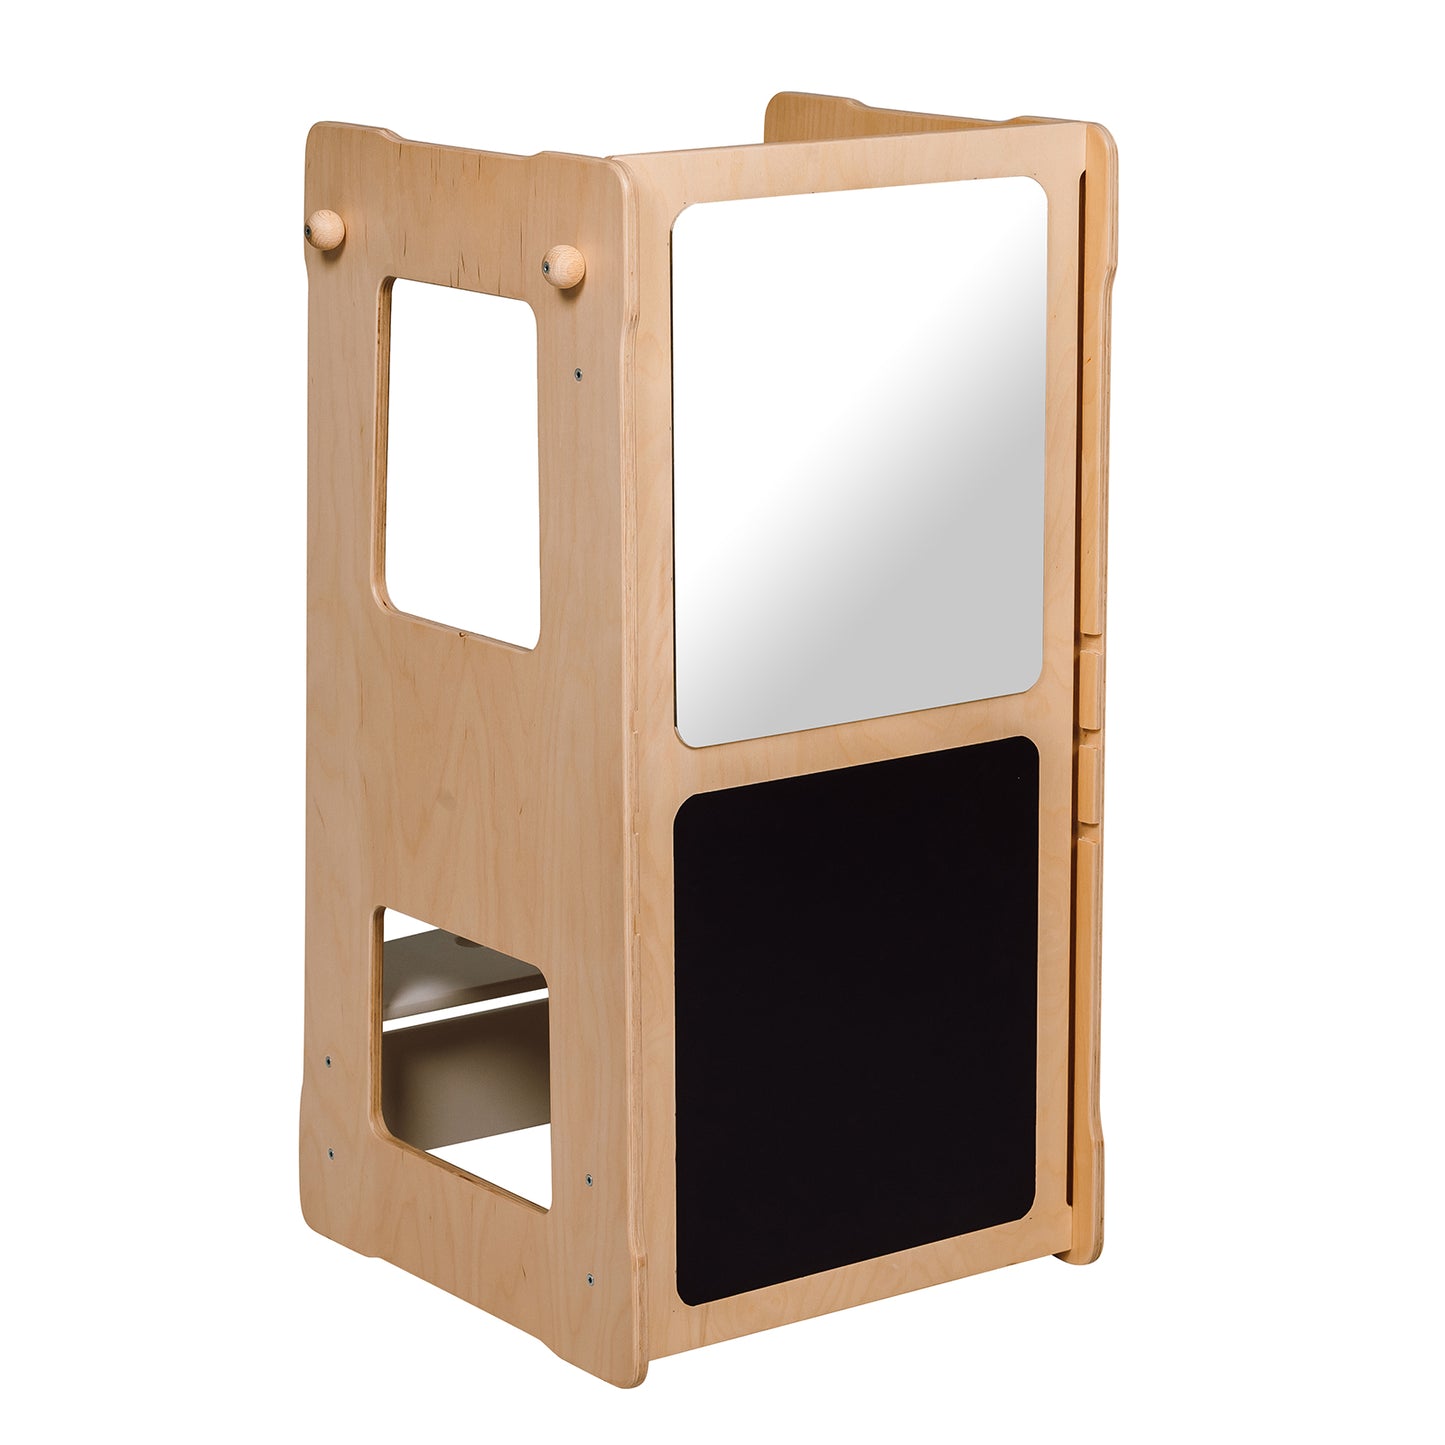 Montessori PIC Learning Tower with 1 Mirror, Chalkboard and Slide